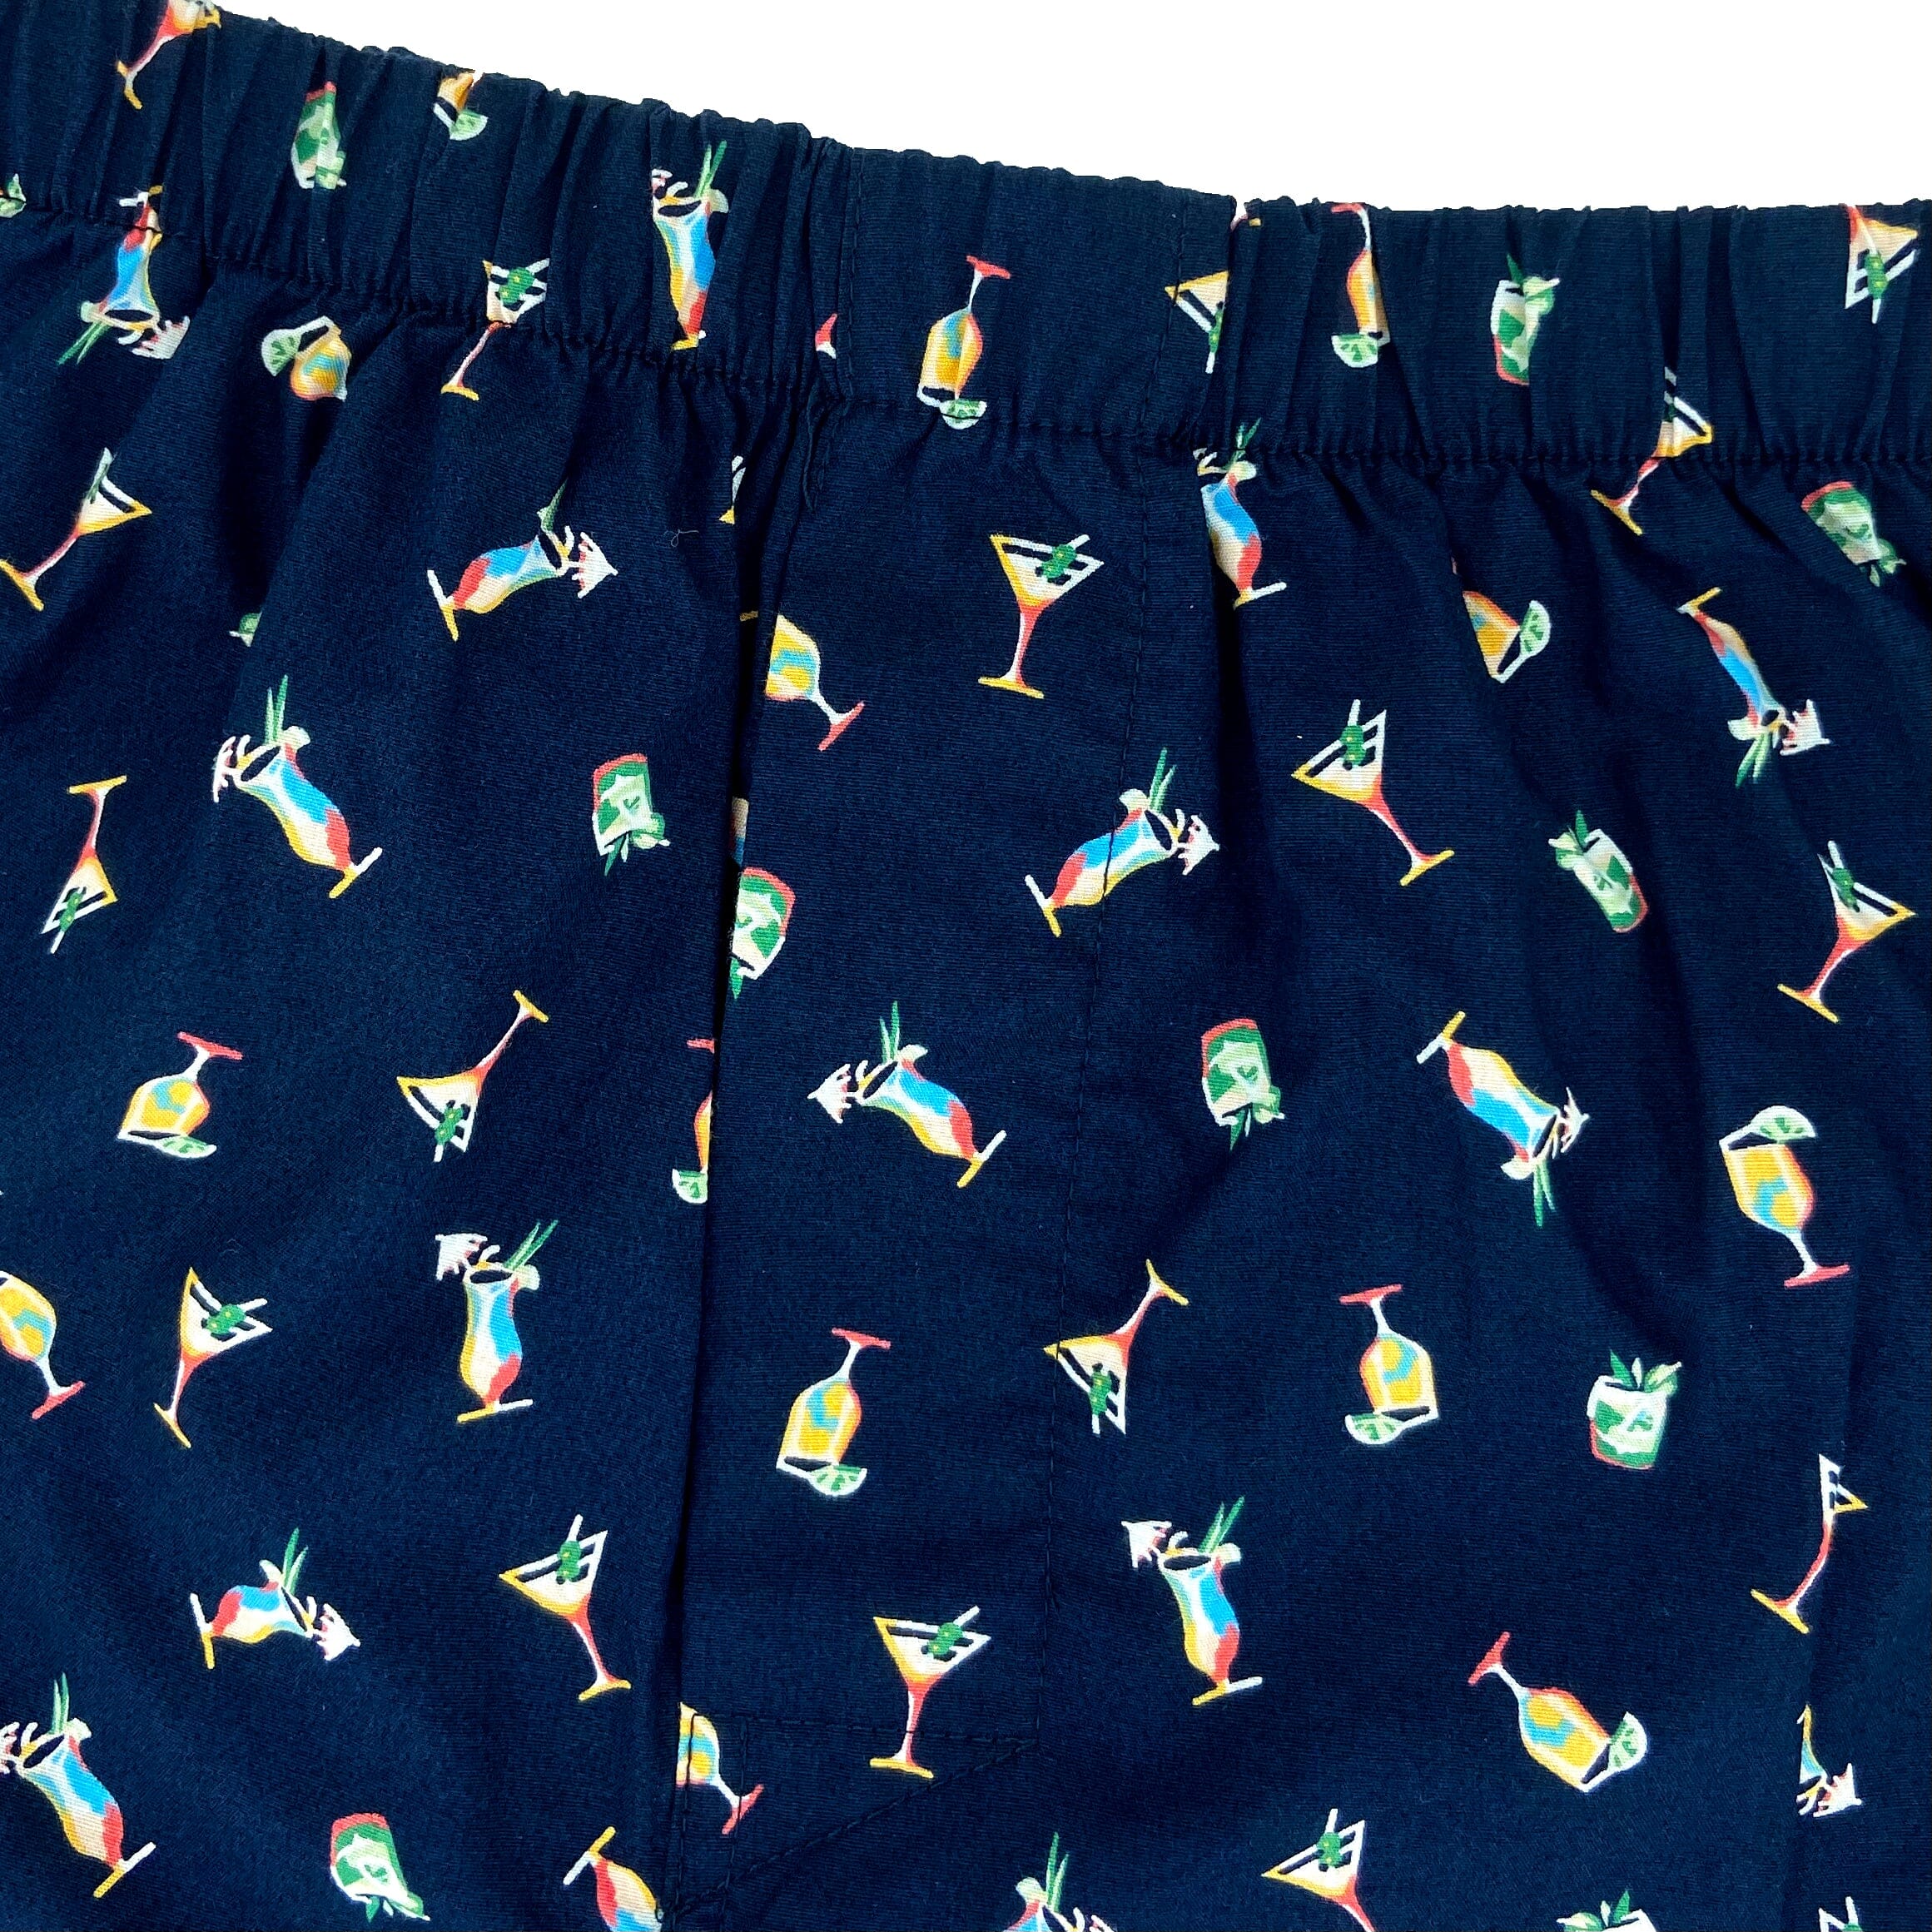 Buy Men's Cocktail Hour Drink Themed Martini Print Cotton Boxer Shorts